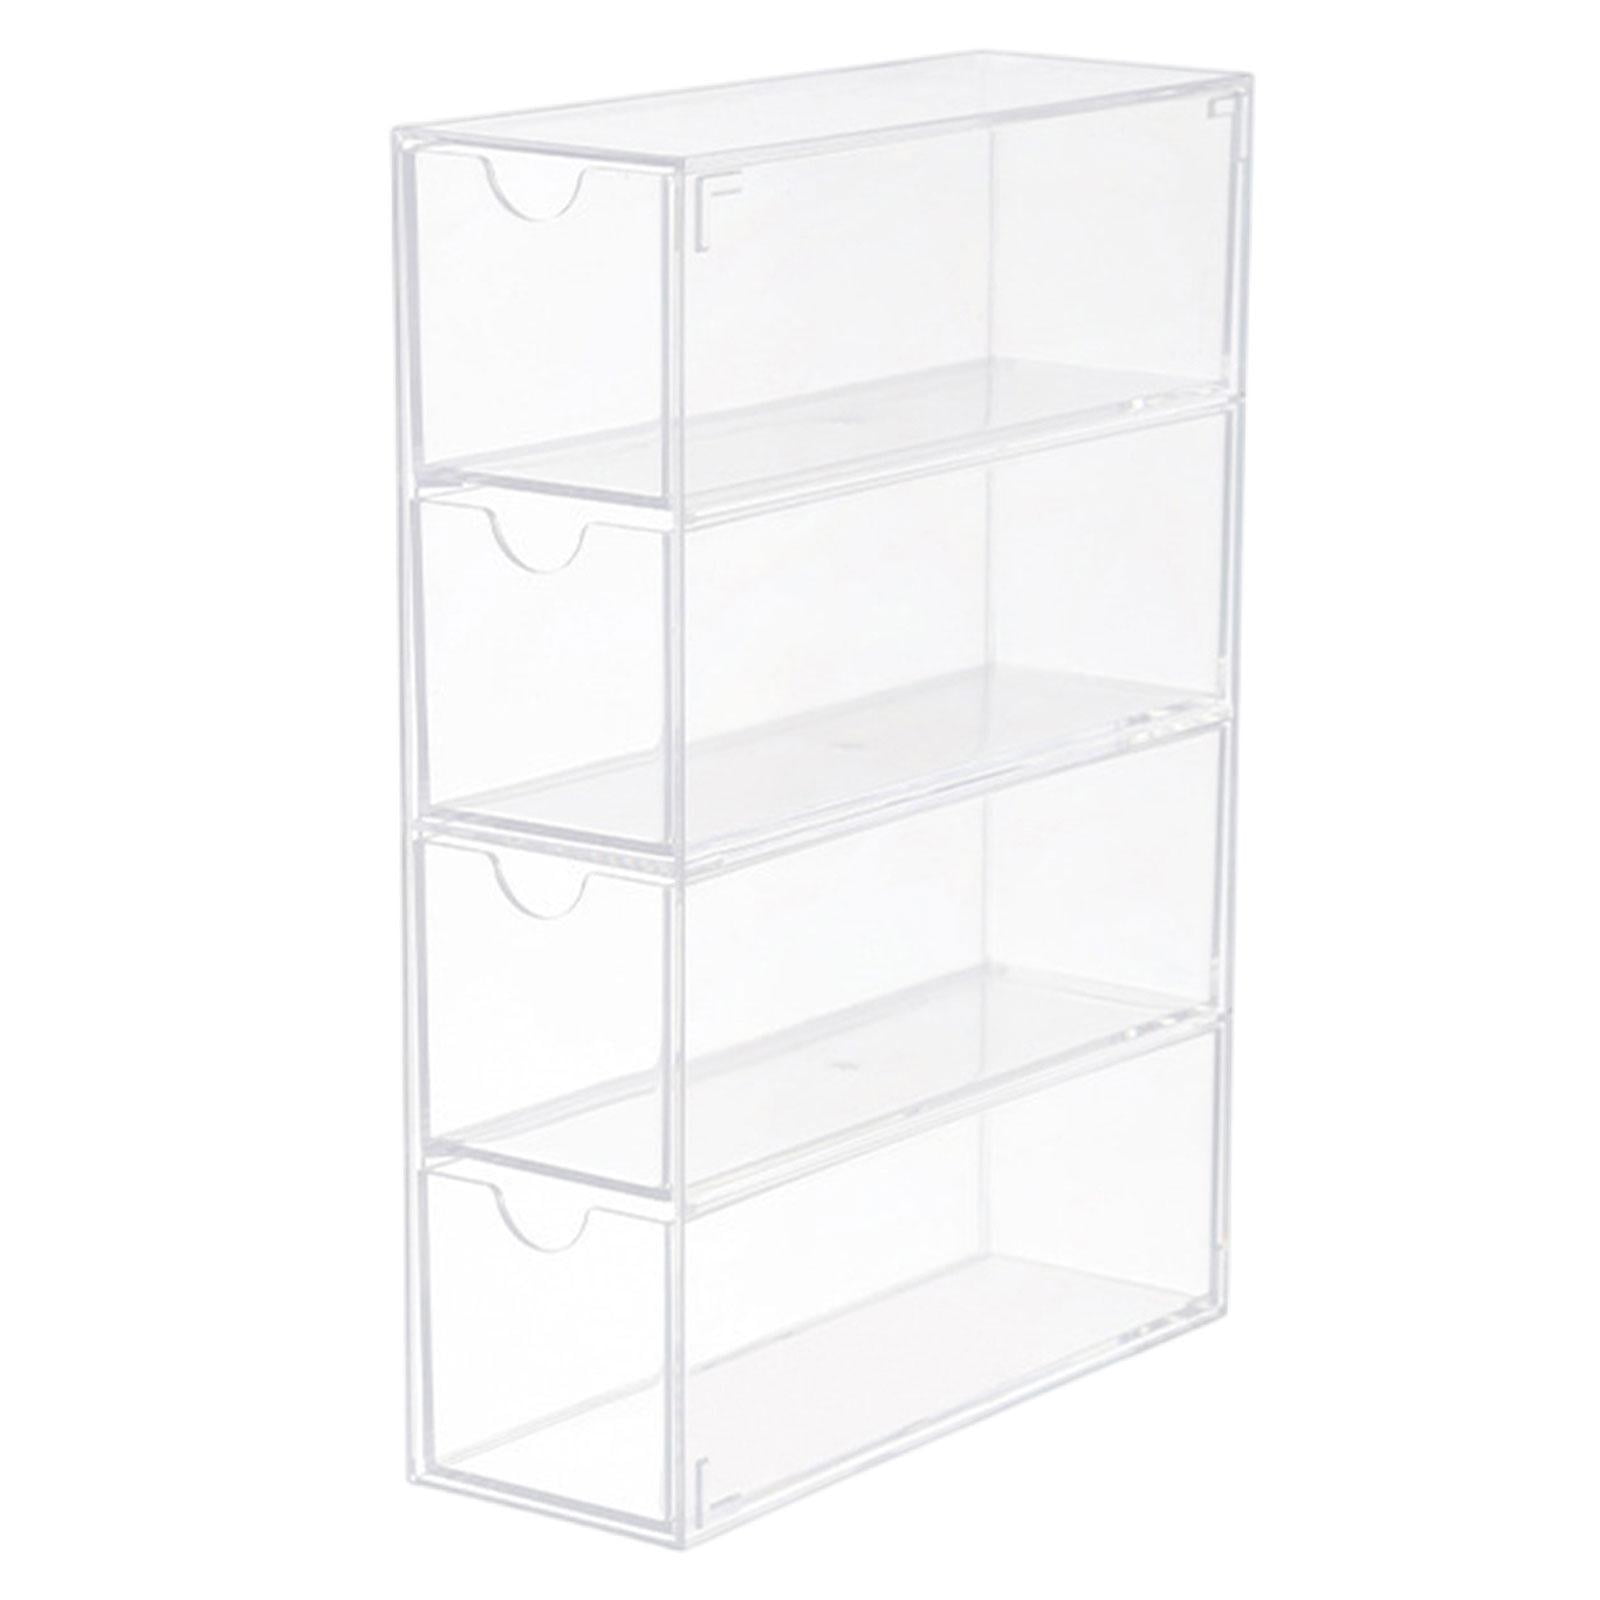  Cq acrylic Clear Cosmetics Organizer Stackable Makeup Storage  Drawers,3 Drawers for The Home Edit Containers For Jewelry Hair Accessories  Nail Polish Lipstick Make up Marker Pen Organizing : Beauty & Personal